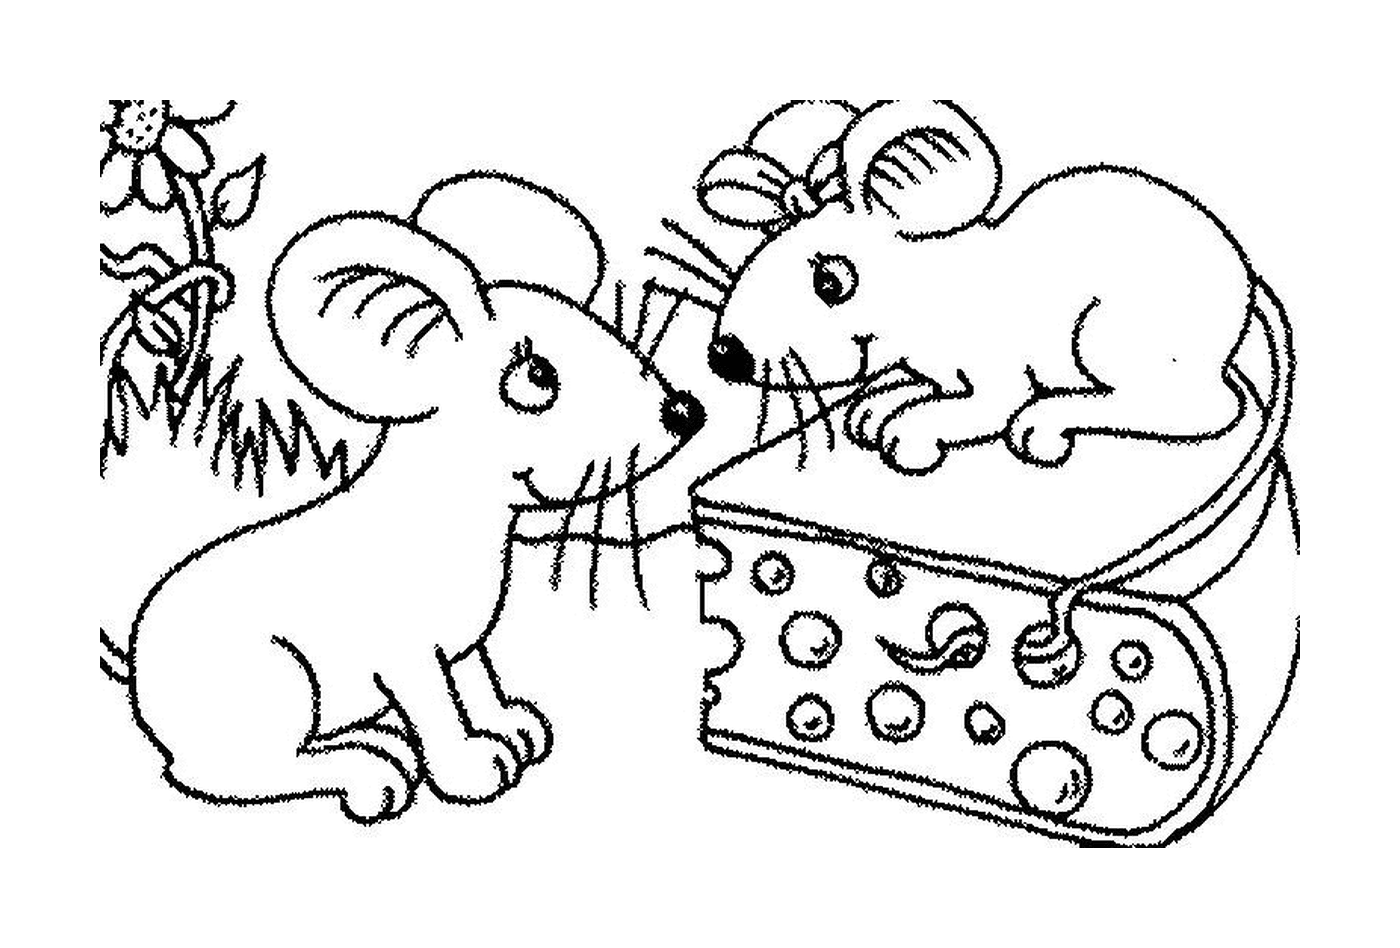  Two mice and a piece of cheese 